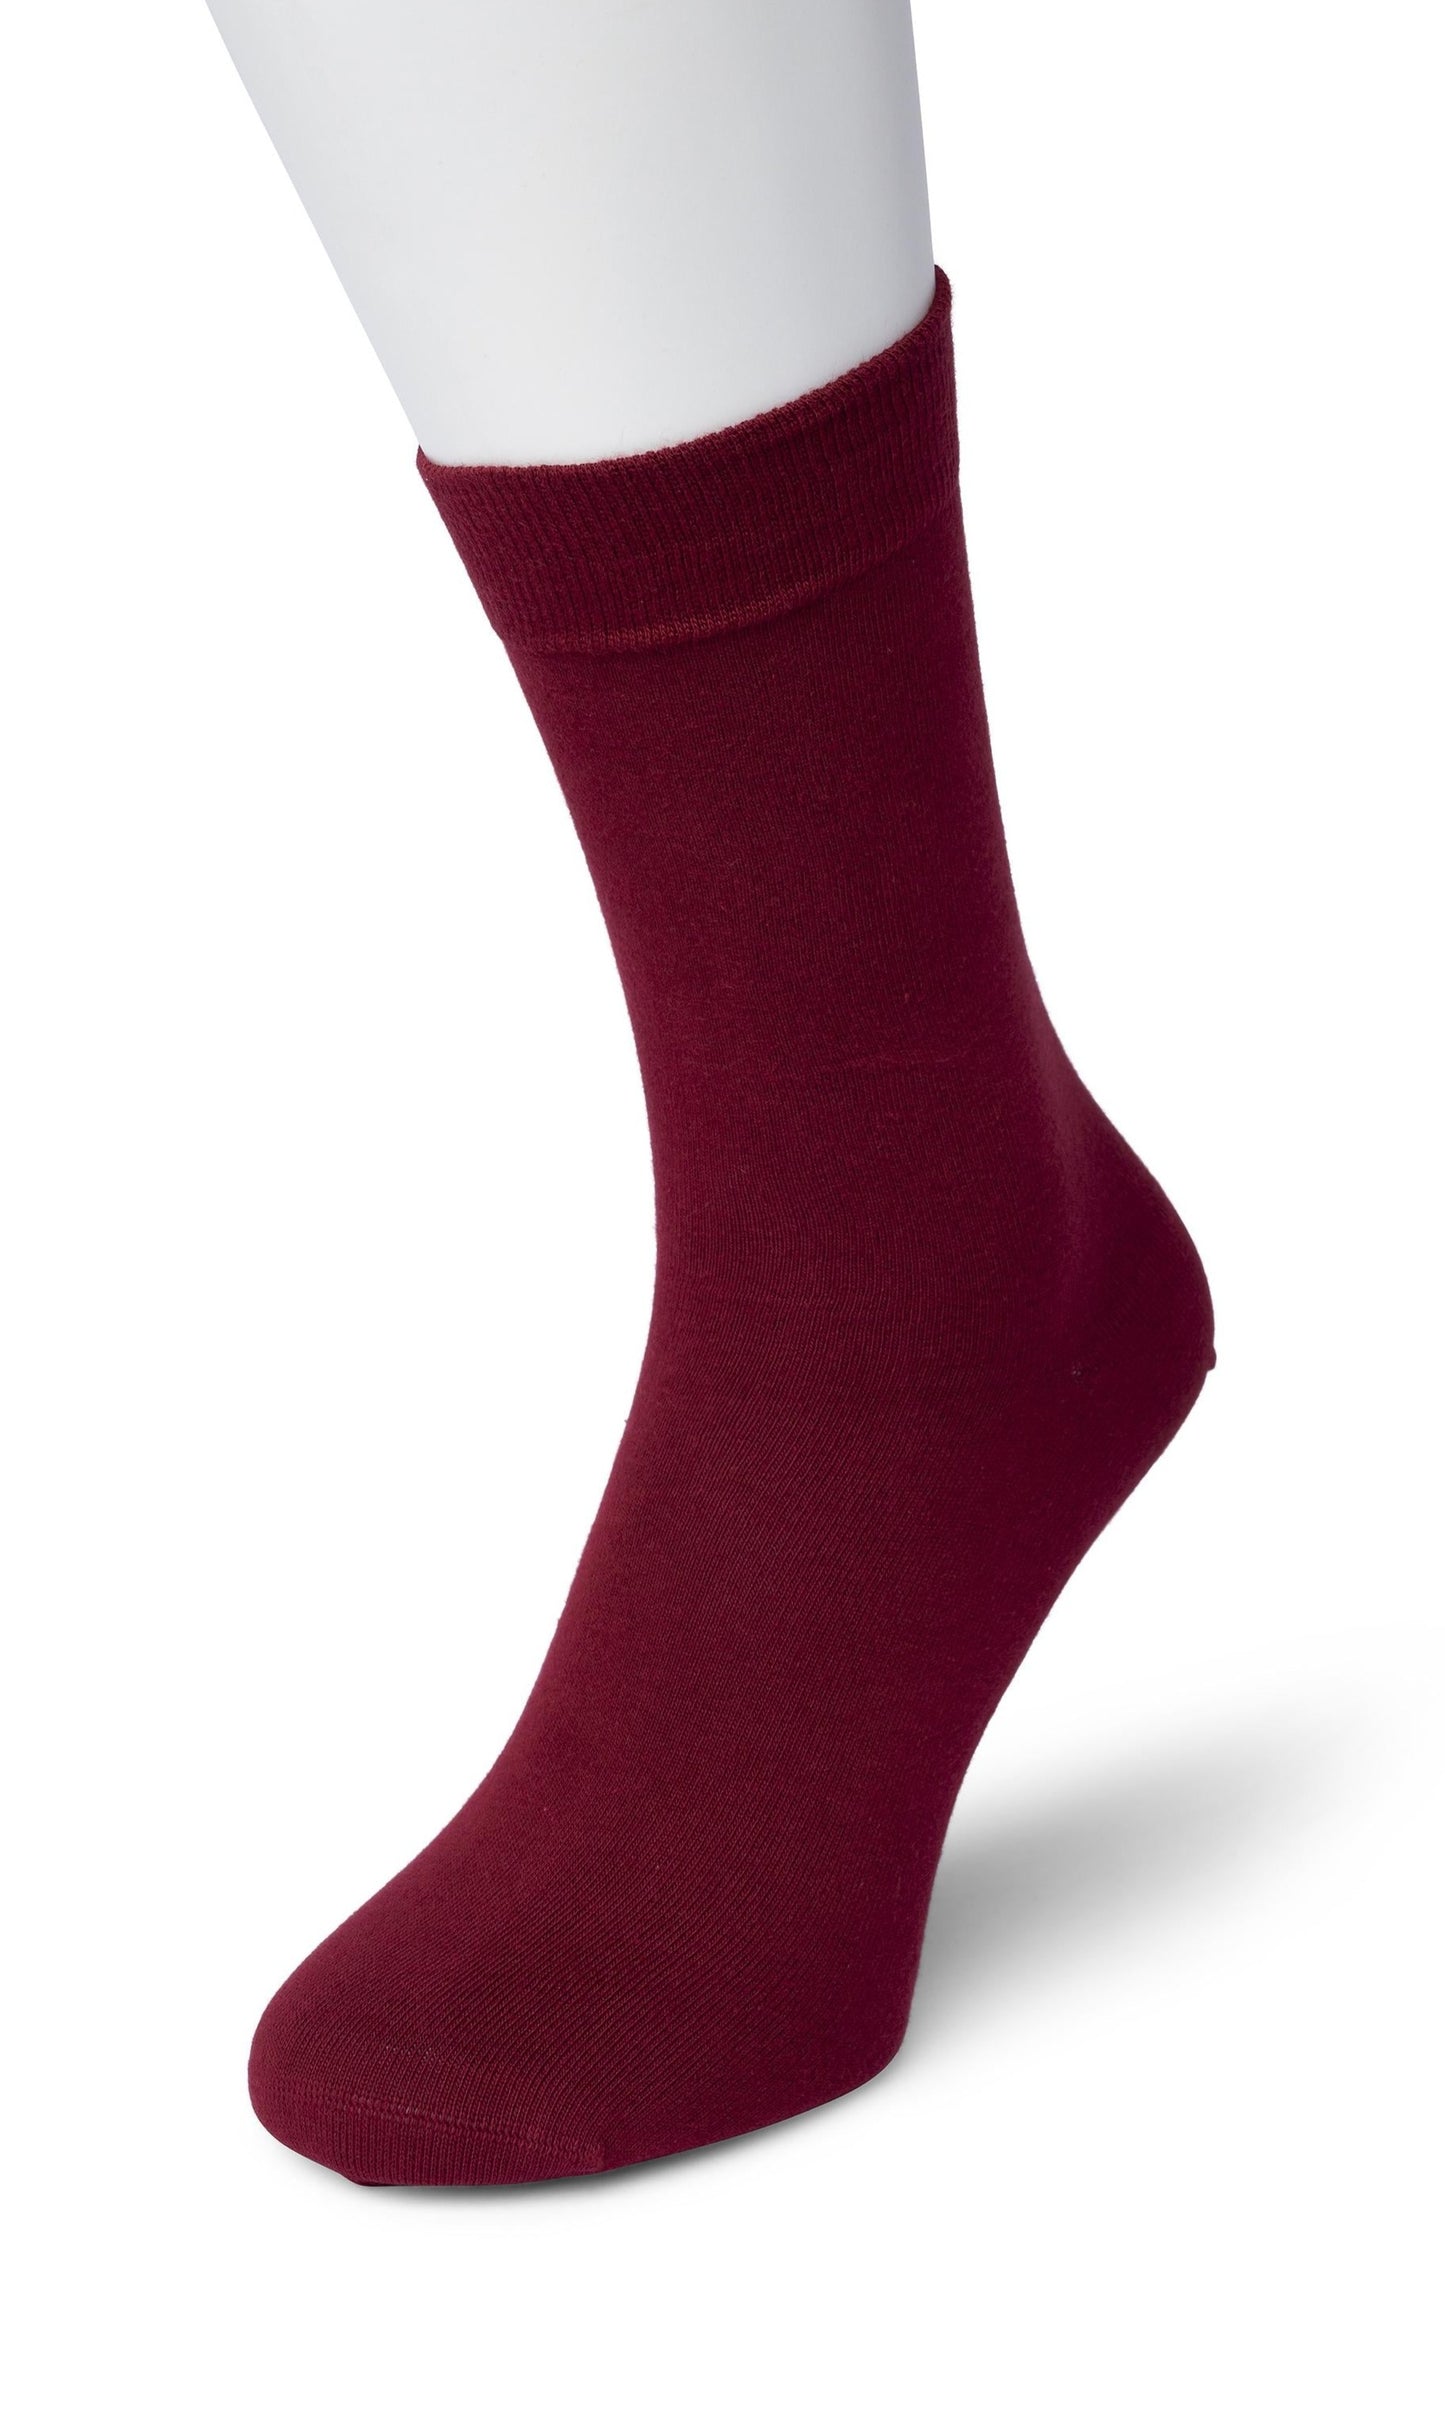 Bonnie Doon 83422 / BD632401 Cotton Sock -  Maroon / bordeaux ankle socks available in men and women sizes